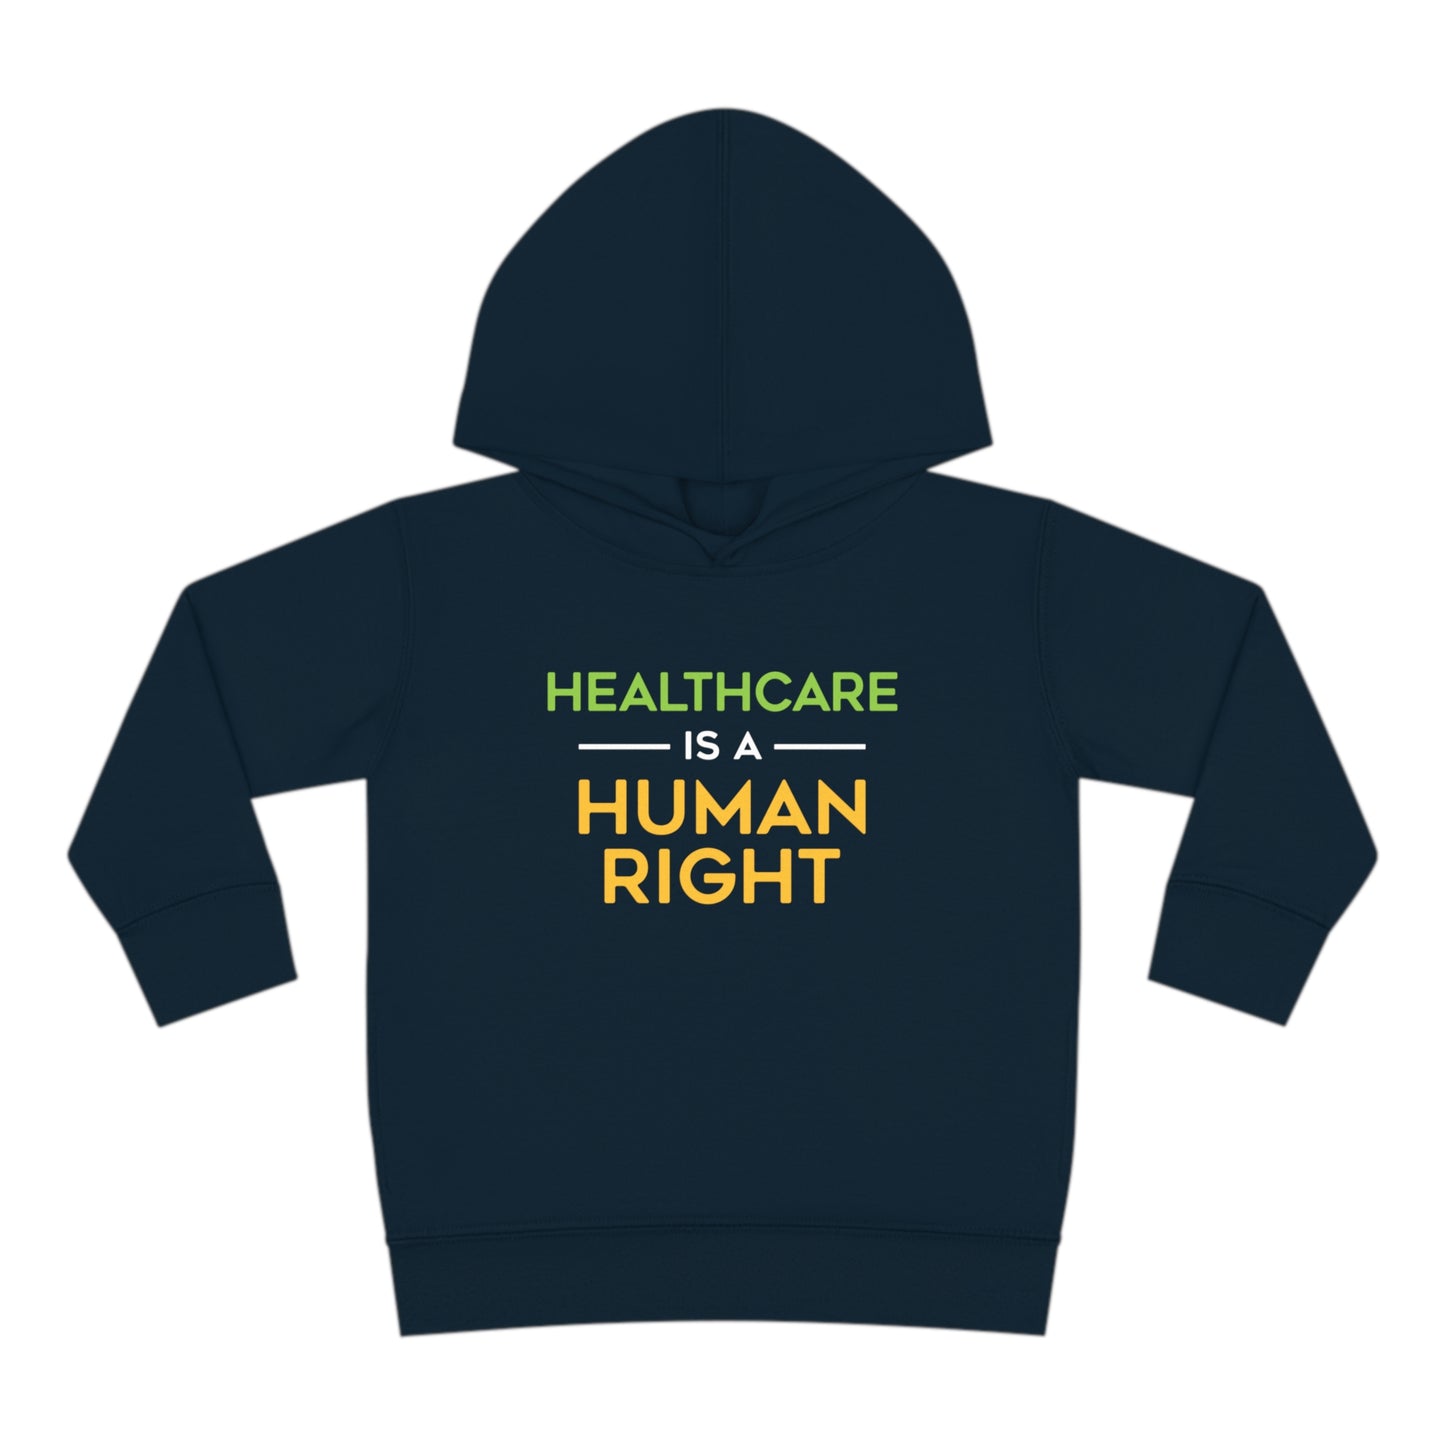 “Healthcare Is A Human Right” Toddler Hoodie